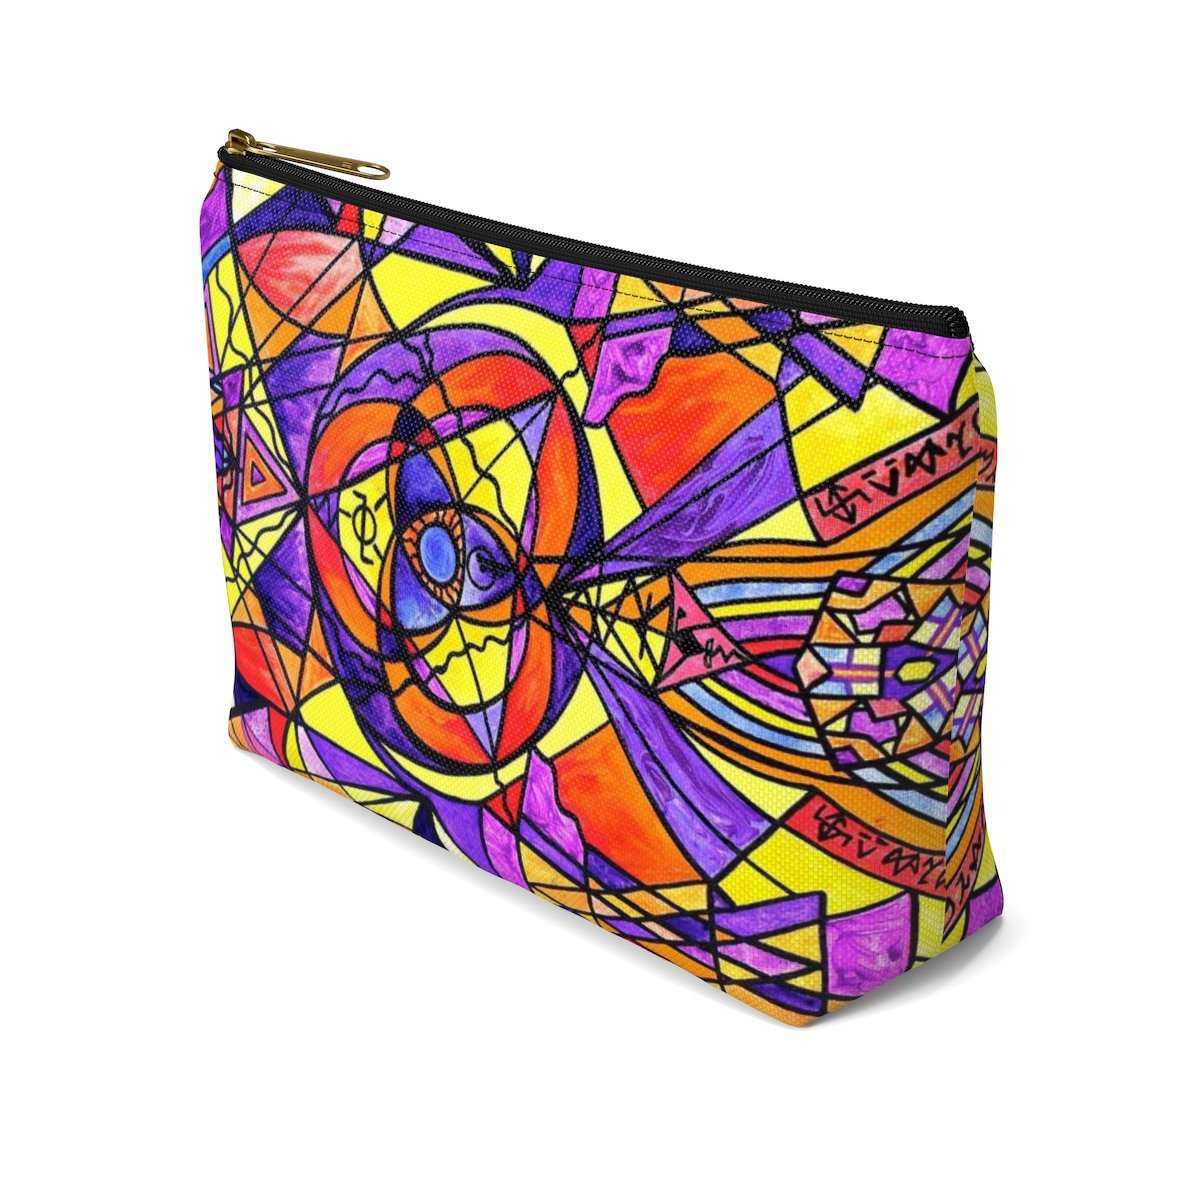 get-your-dream-of-the-destiny-grid-accessory-pouch-w-t-bottom-on-sale_8.jpg